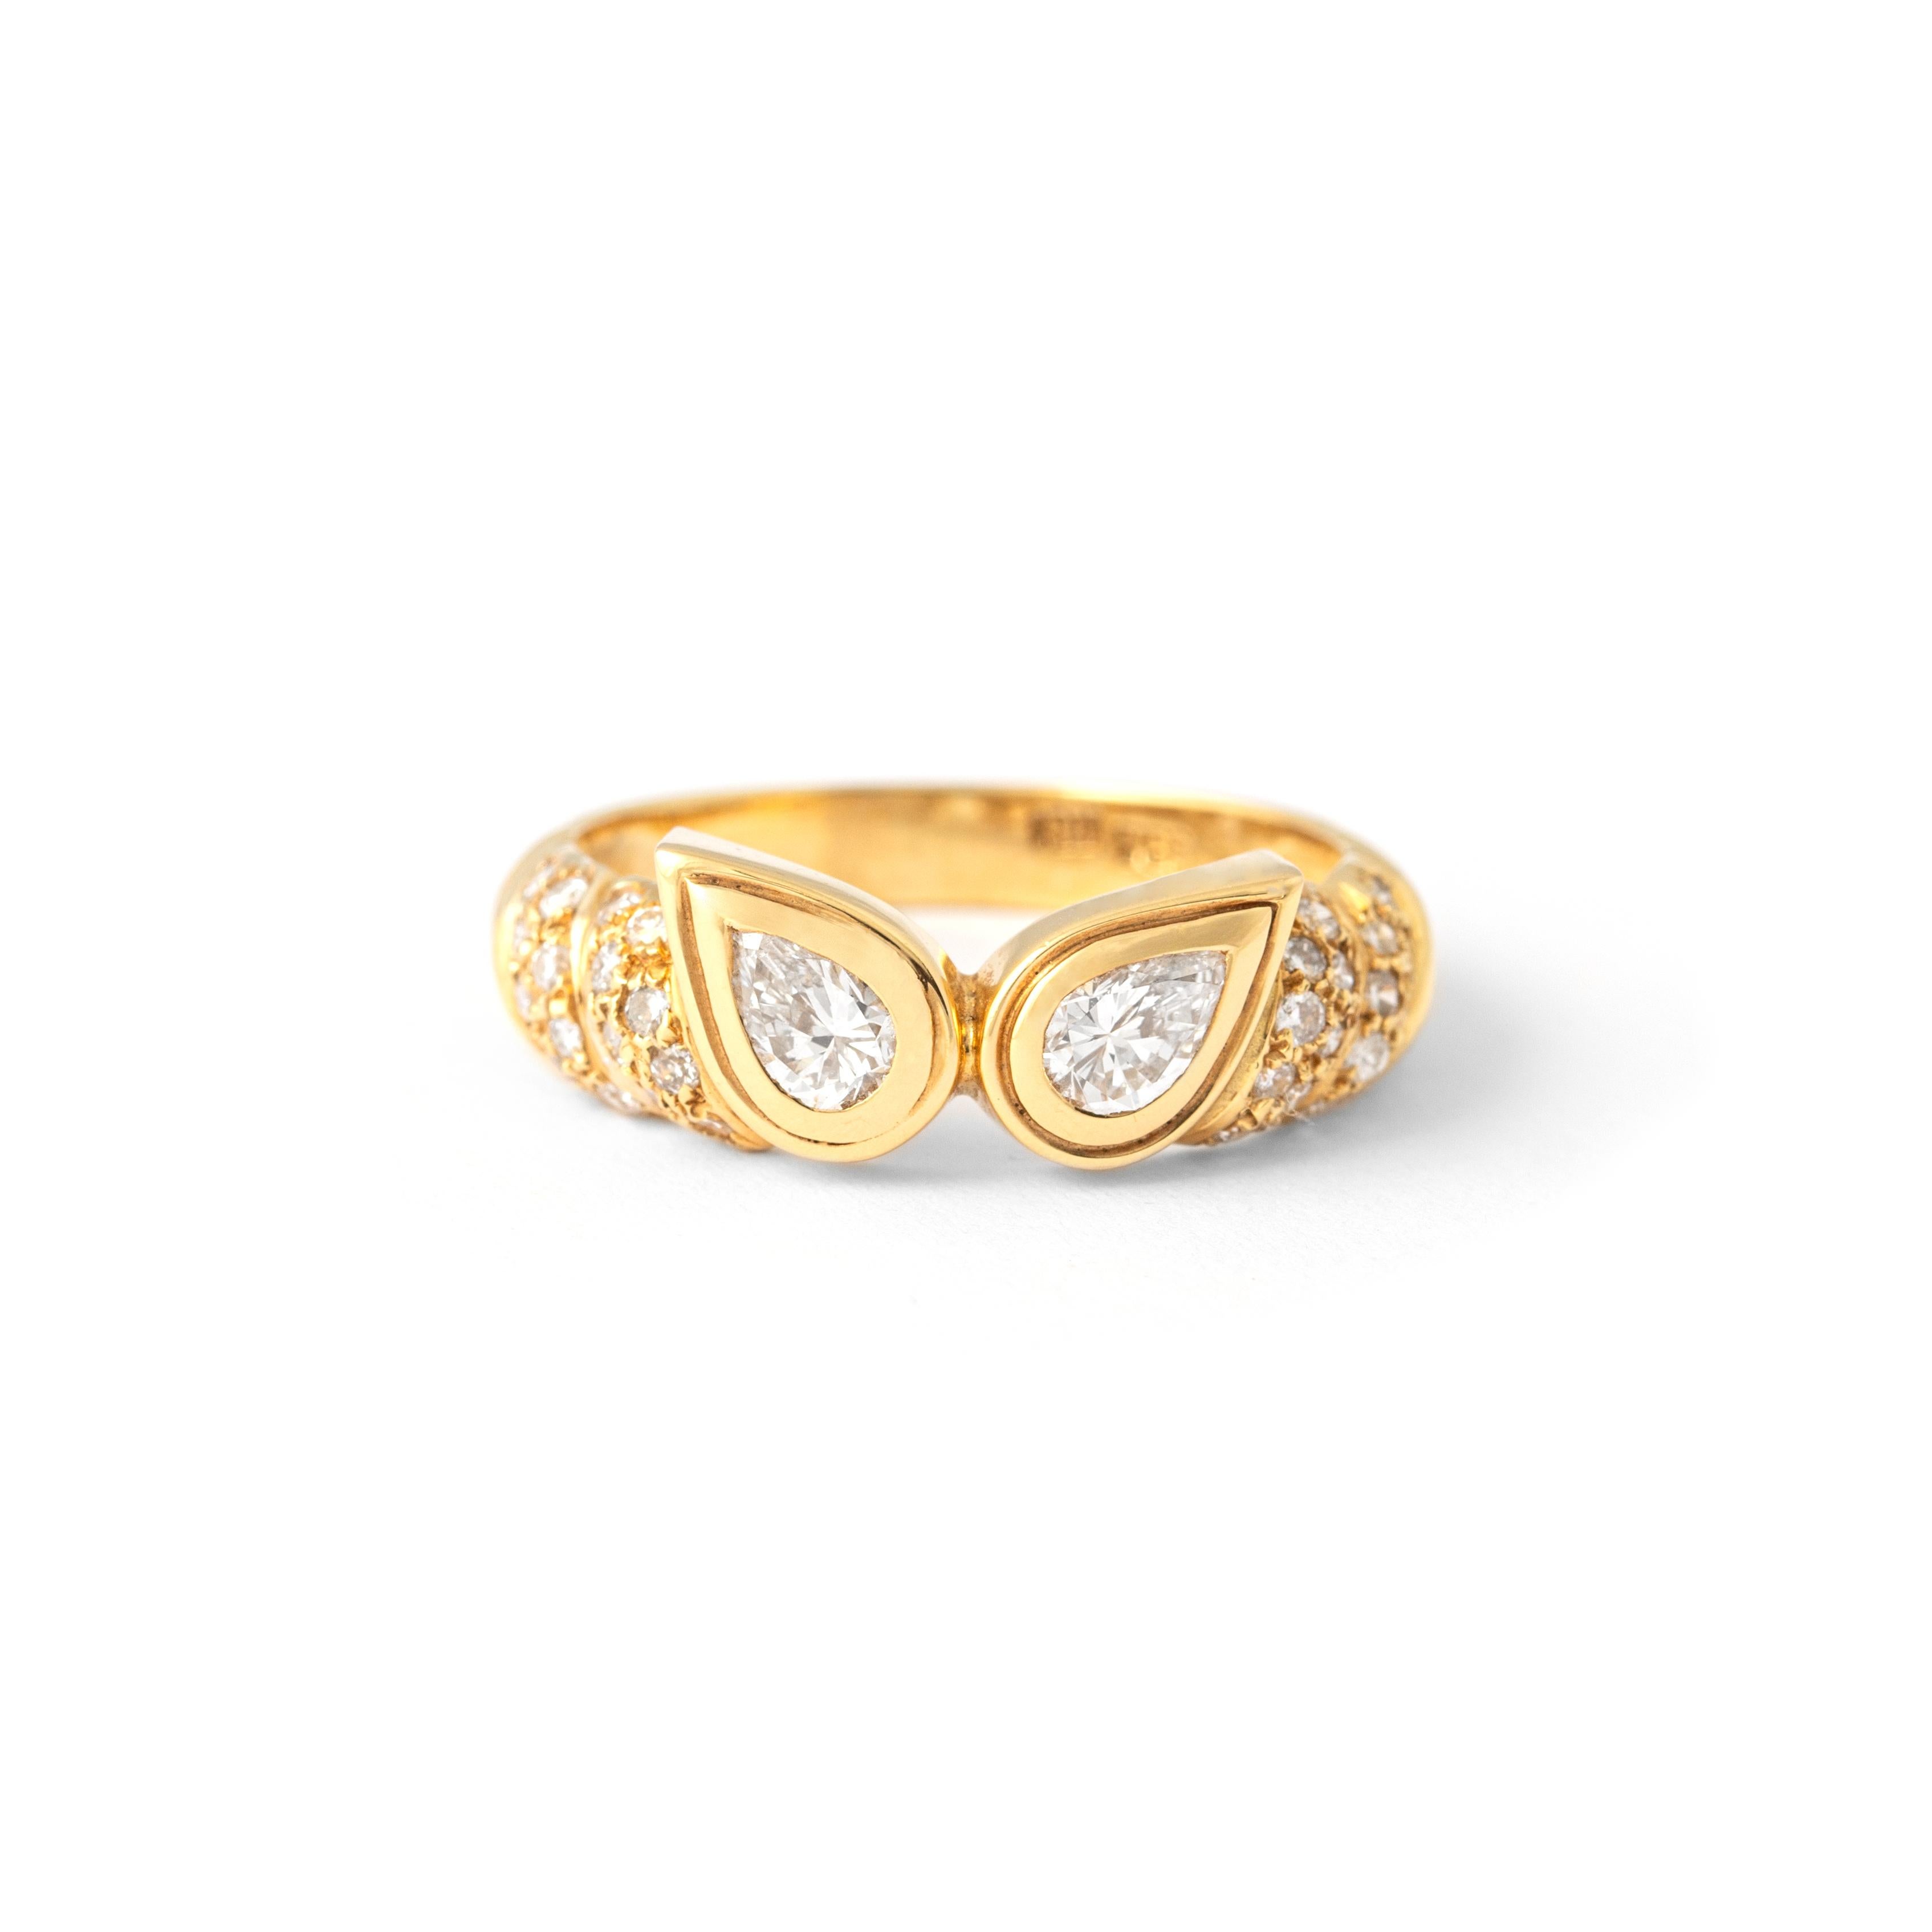 Diamond Yellow Gold 18K Ring.
Set by two pear shape Diamond of 0,54 carat estimated G color and Vs clarity. In addition 0,26 carat round Diamond.
Size: 7.25 US.
Total gross weight: 4.70 grams.
